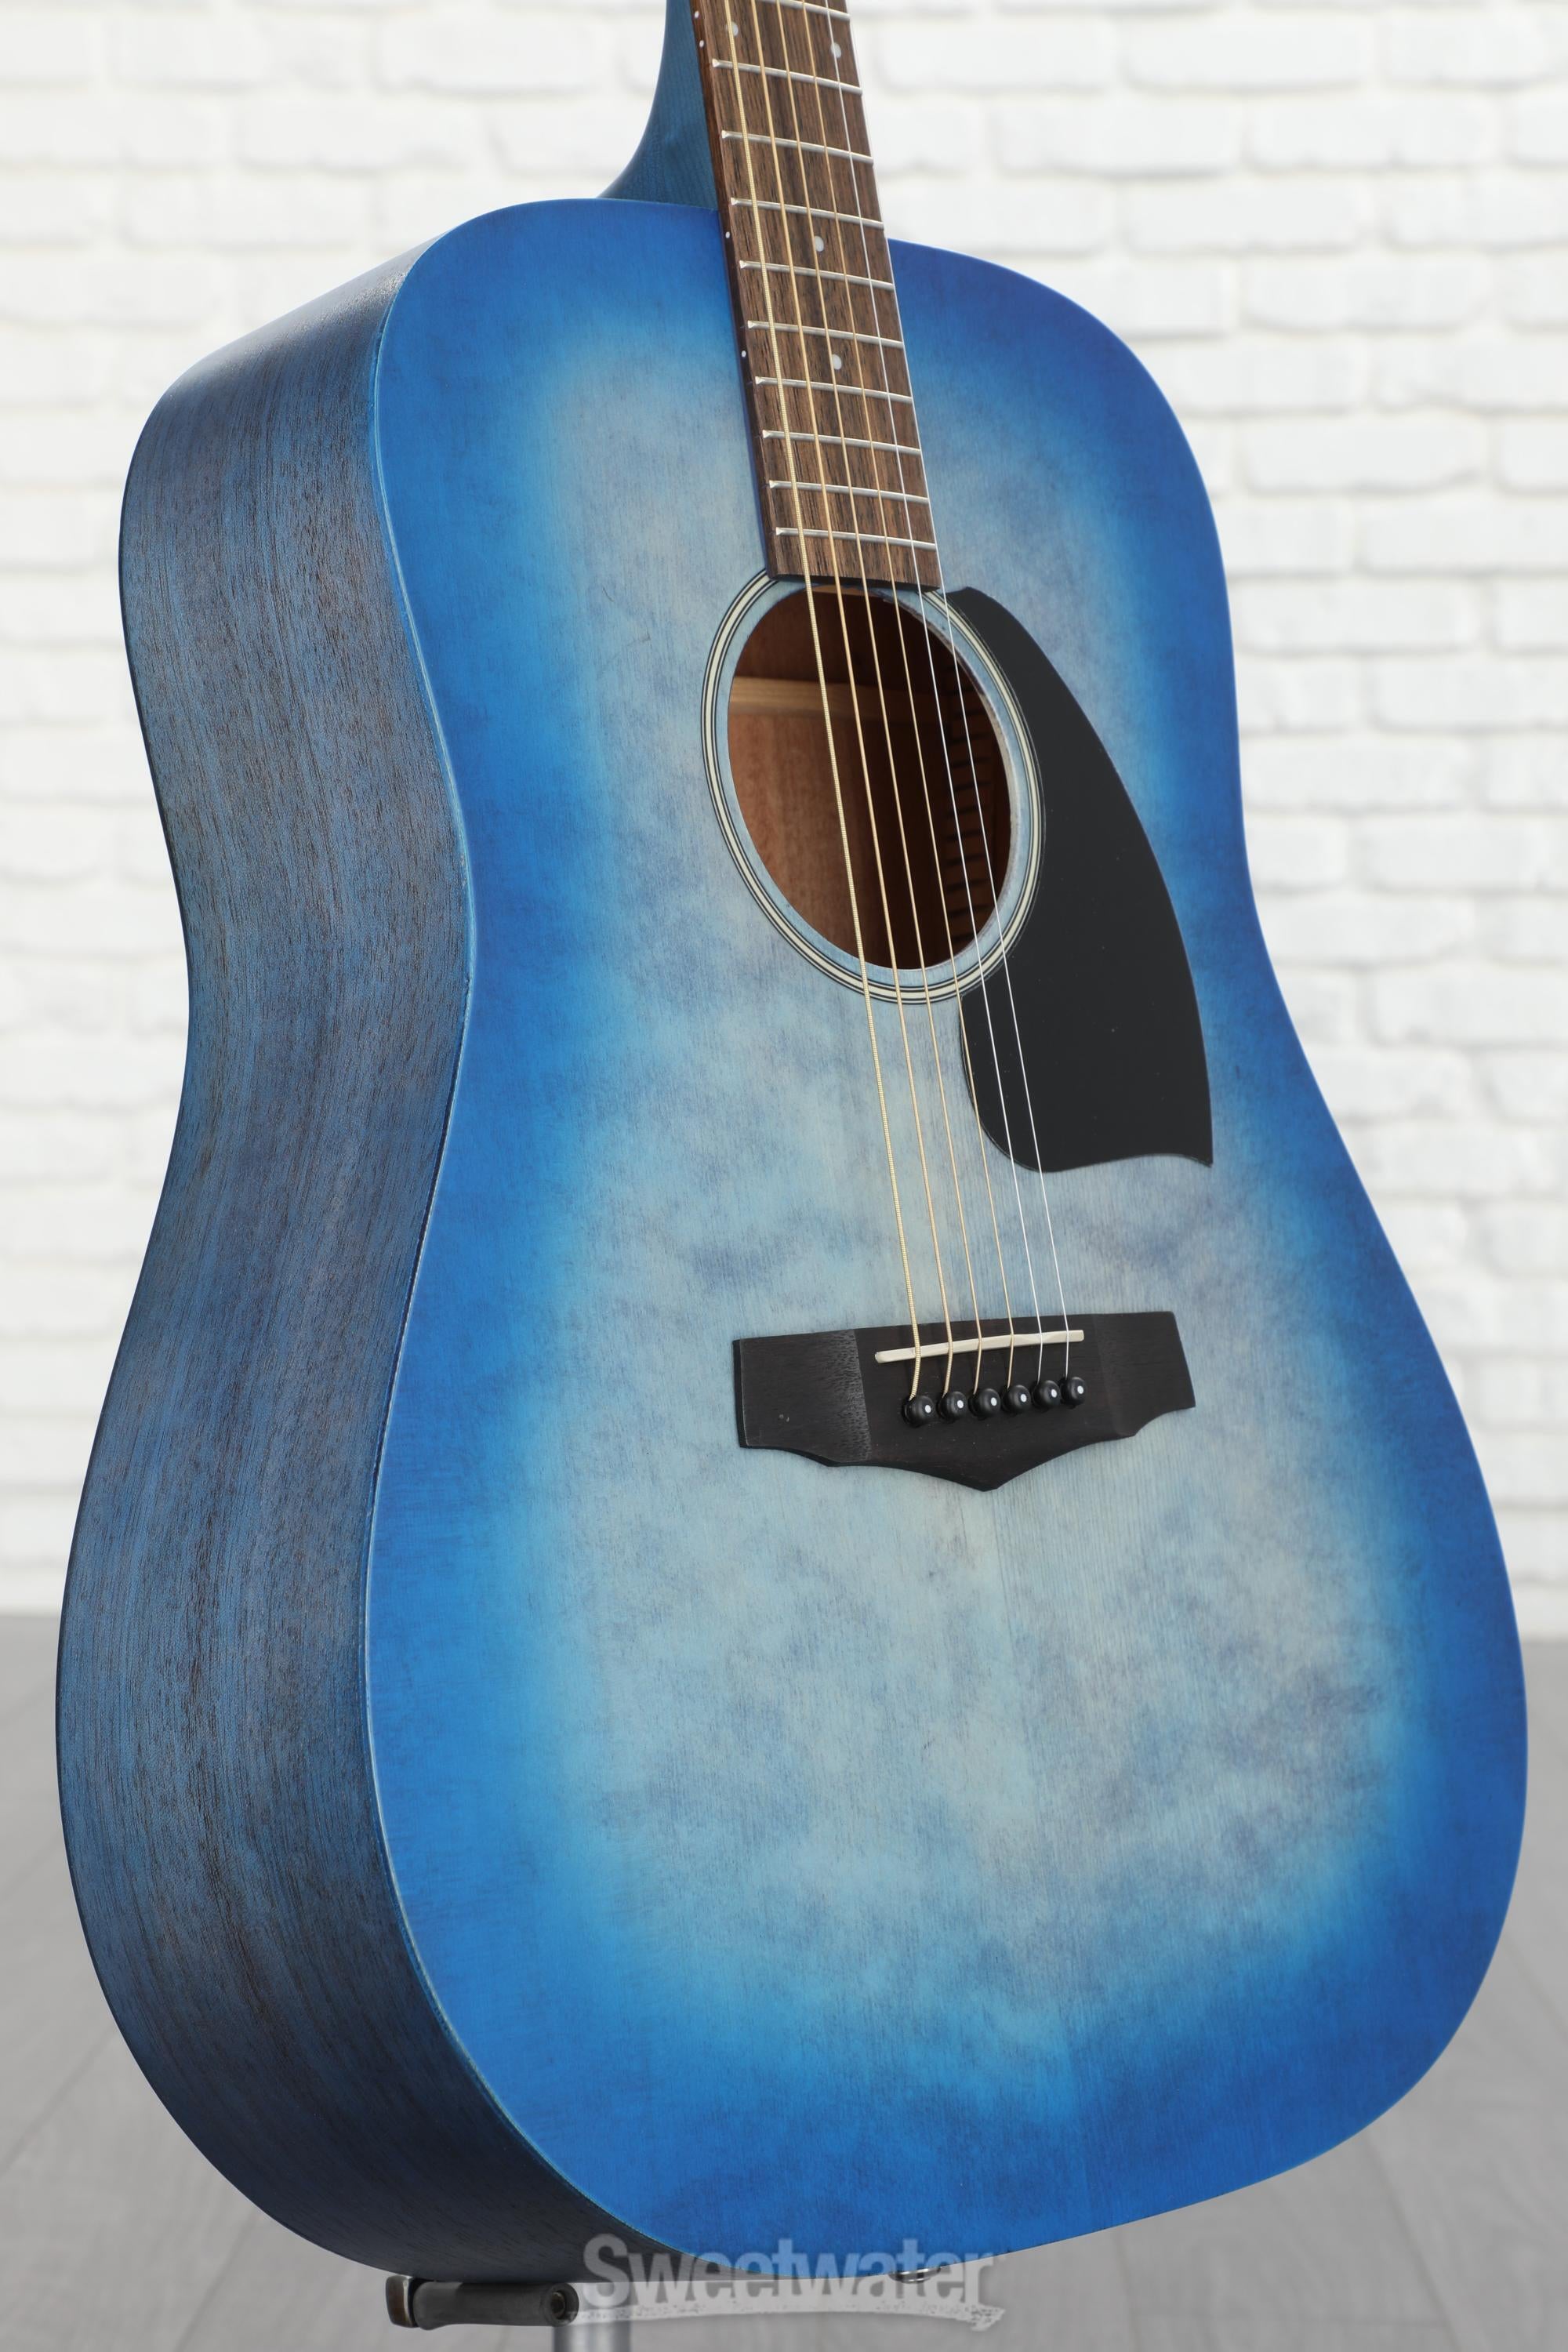 Ibanez PF18 Acoustic Guitar - Weathered Denim Blue Reviews